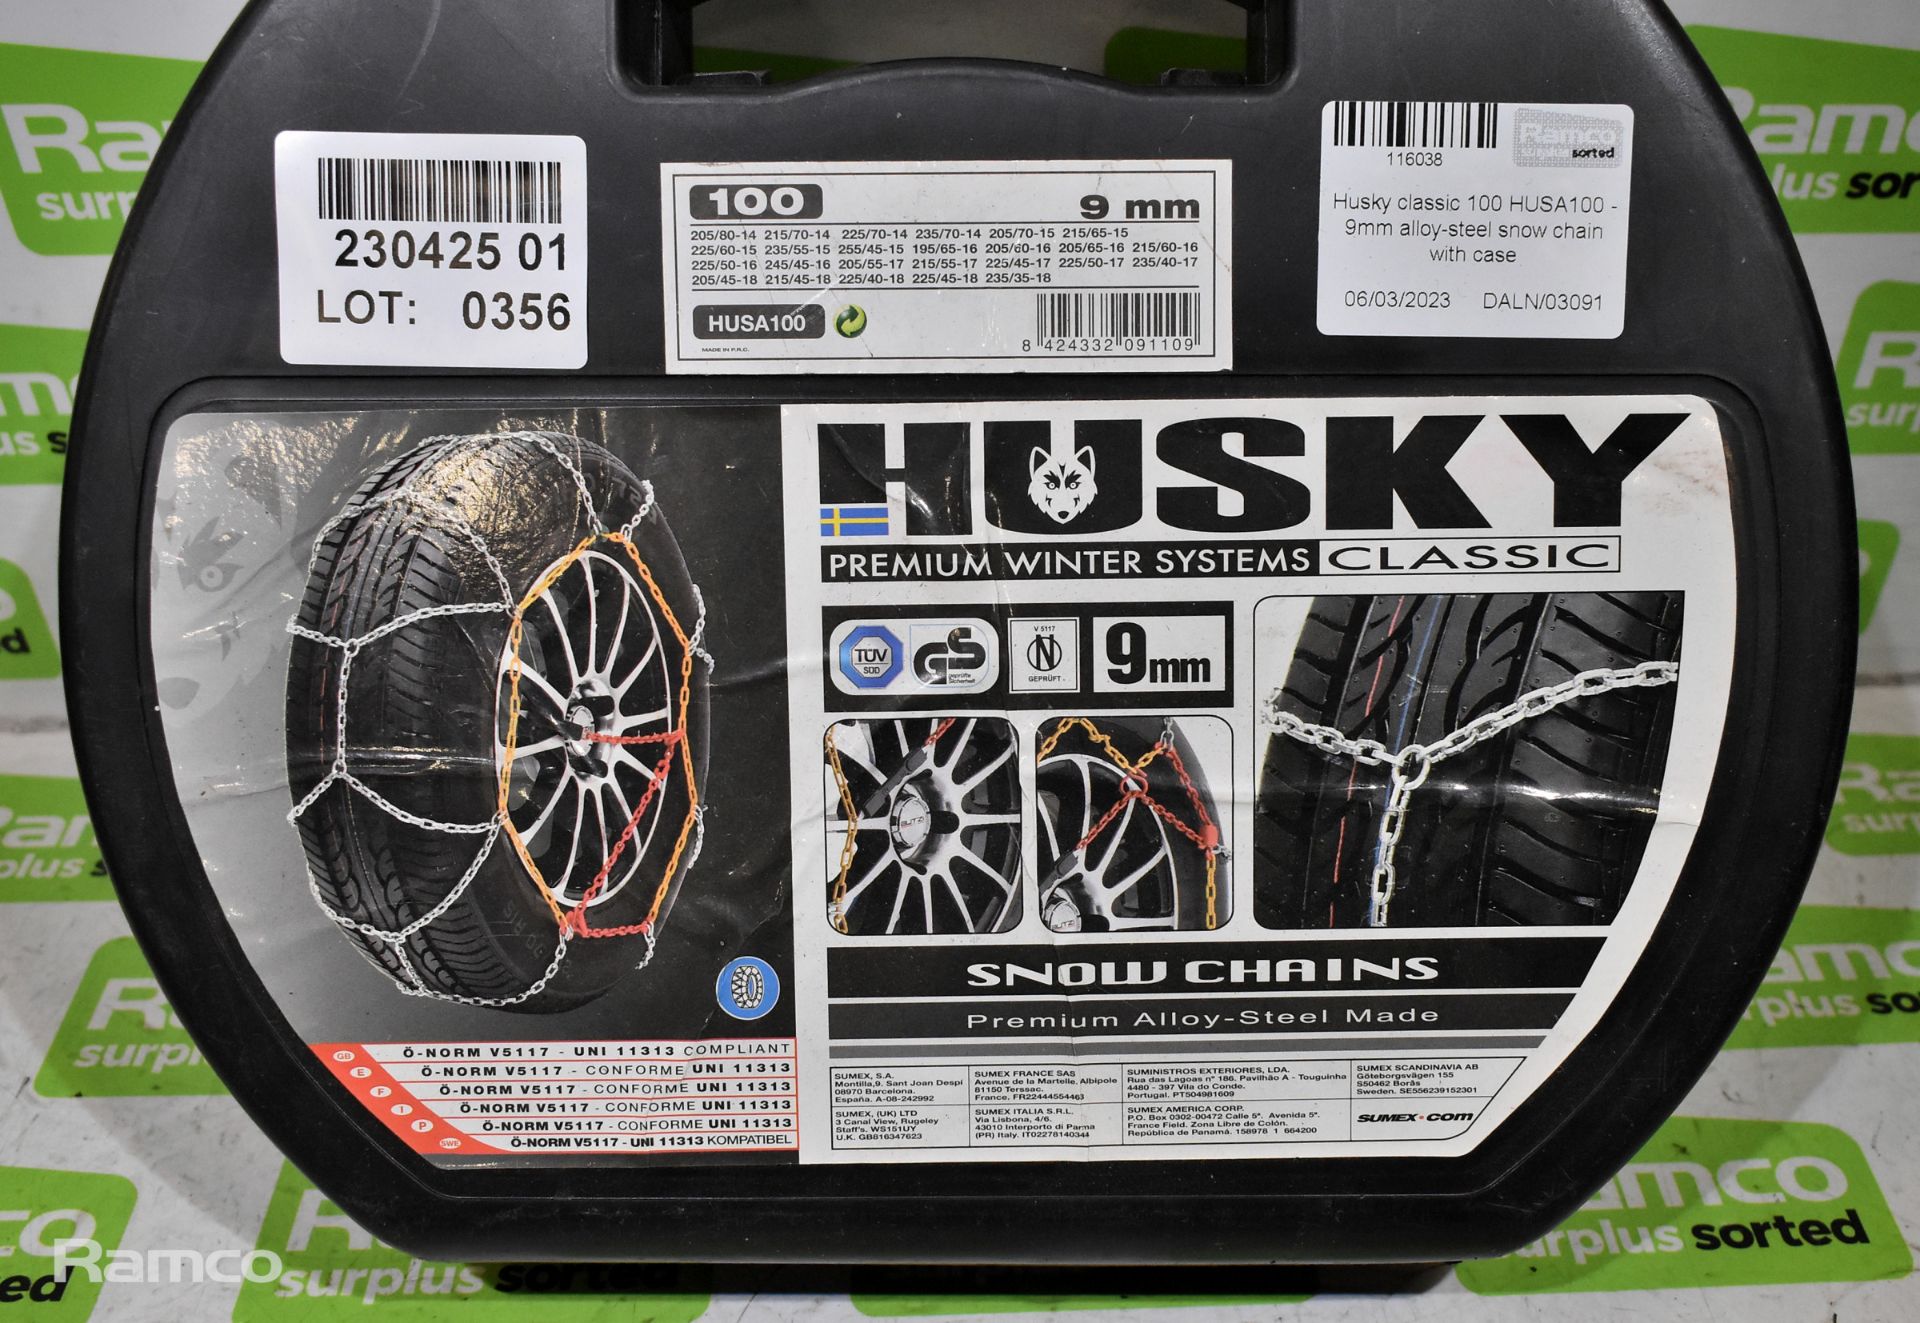 Husky classic 100 HUSA 100 - 9mm alloy-steel snow chain with case - Image 2 of 4